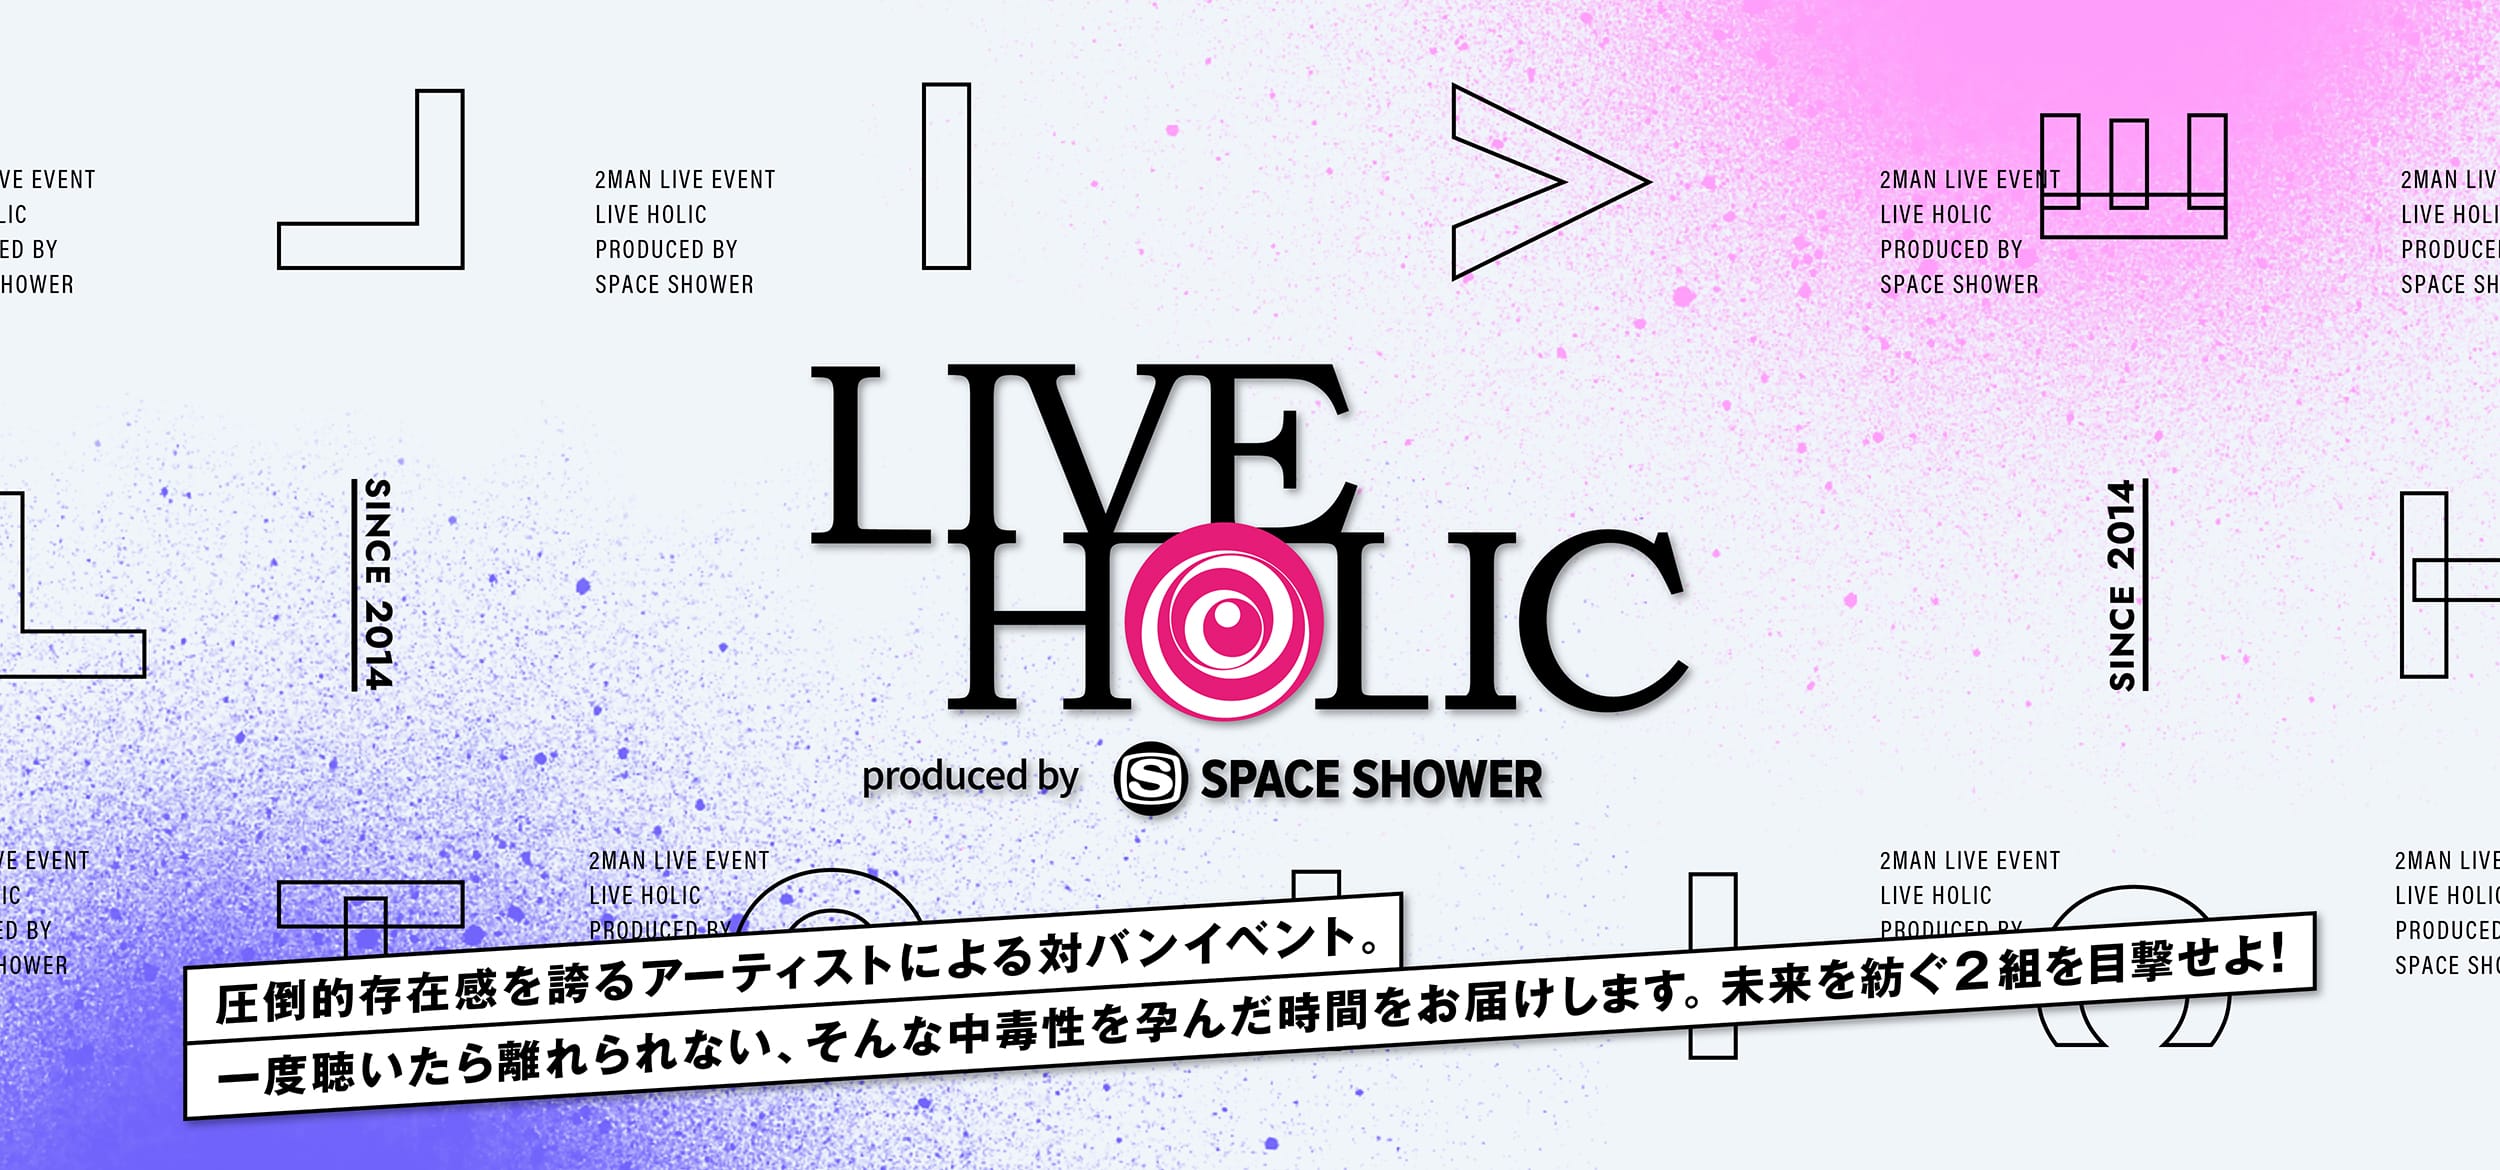 LIVE HOLIC produced by SPACE SHOWER | ライブホリック